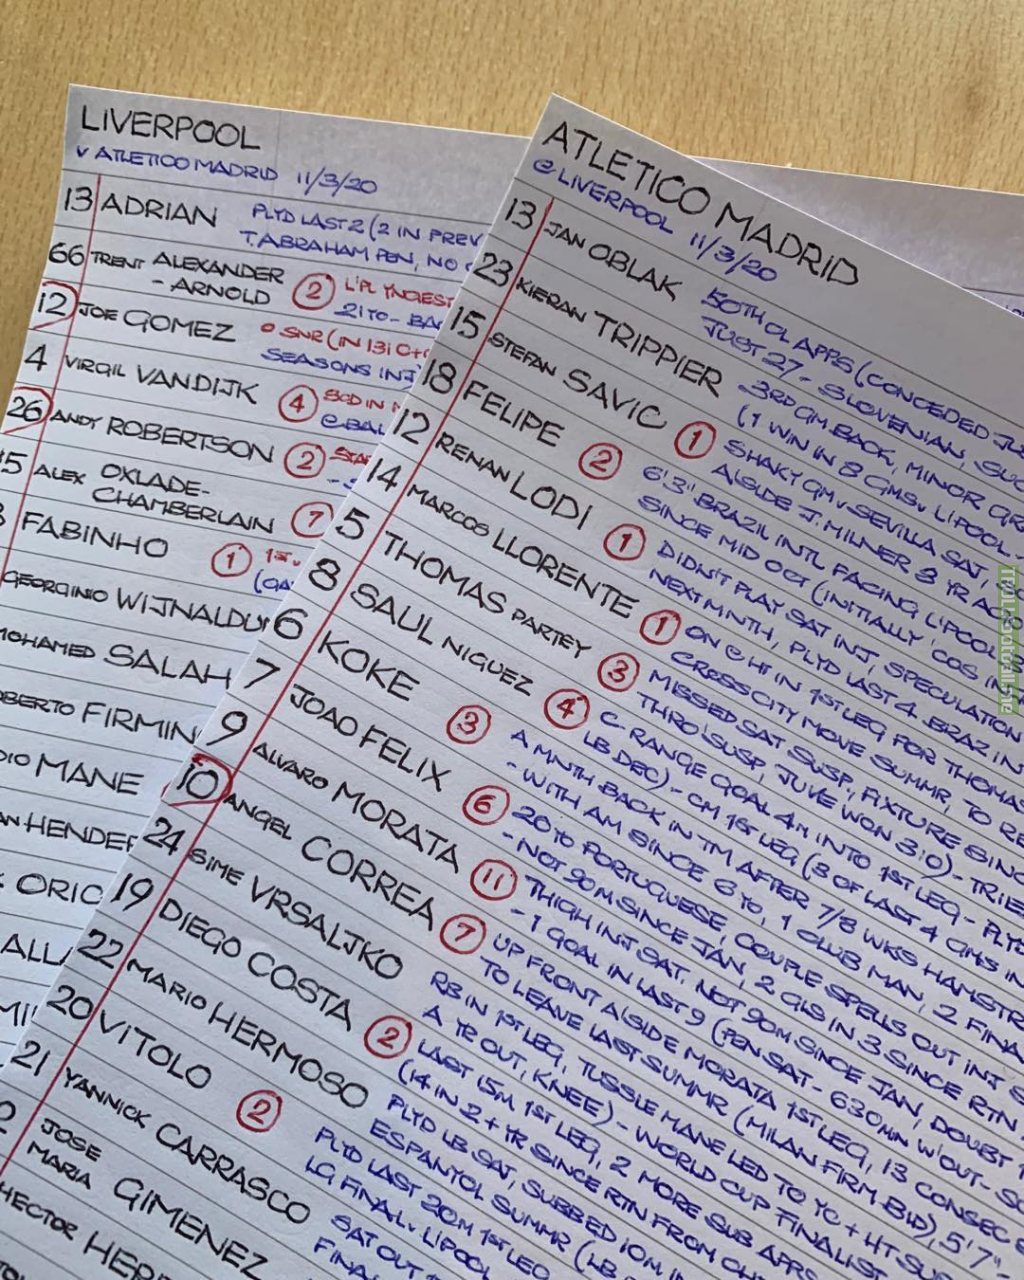 Minor but interesting insight into the work of commentators: Clive Tyldesley meticulous handwritten notes ahead of Liverpool-Atletico Last week